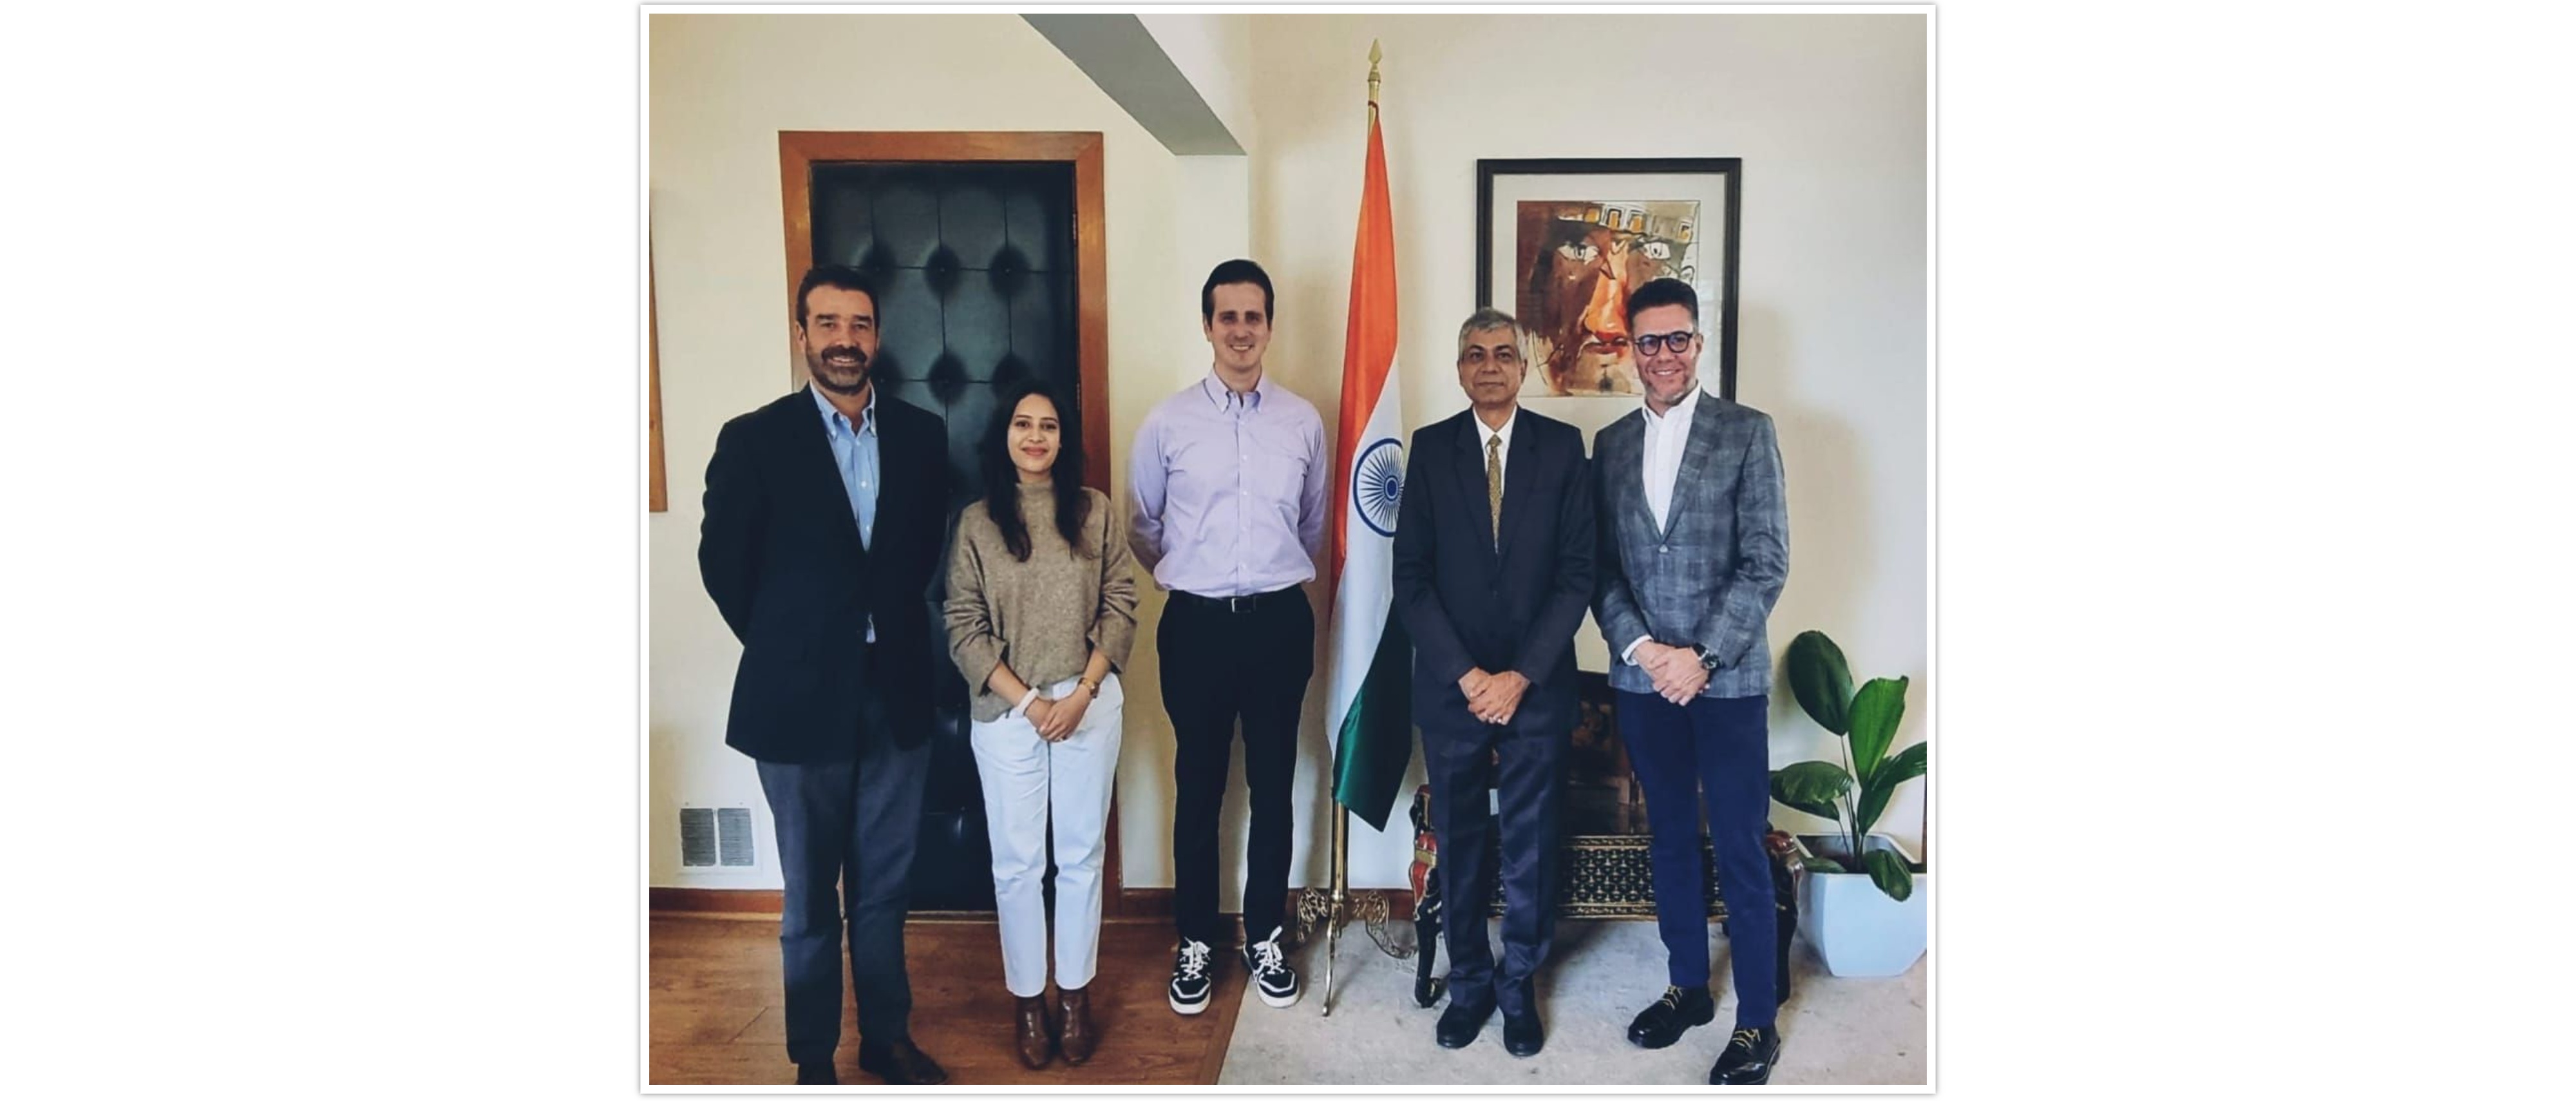  <div style="fcolor: #fff; font-weight: 600; font-size: 1.5em;">
<p style="font-size: 13.8px;">Ambassador Pankaj Sharma and Second Secretary Ms.Vallari Gaikwad met with representatives from Coppel: Mr. Jorge Gomez, Mr. Joel Rosas and Mr. Domingo Soto.
<br /><span style="text-align: center;">14 September 2022</span></p>
</div>